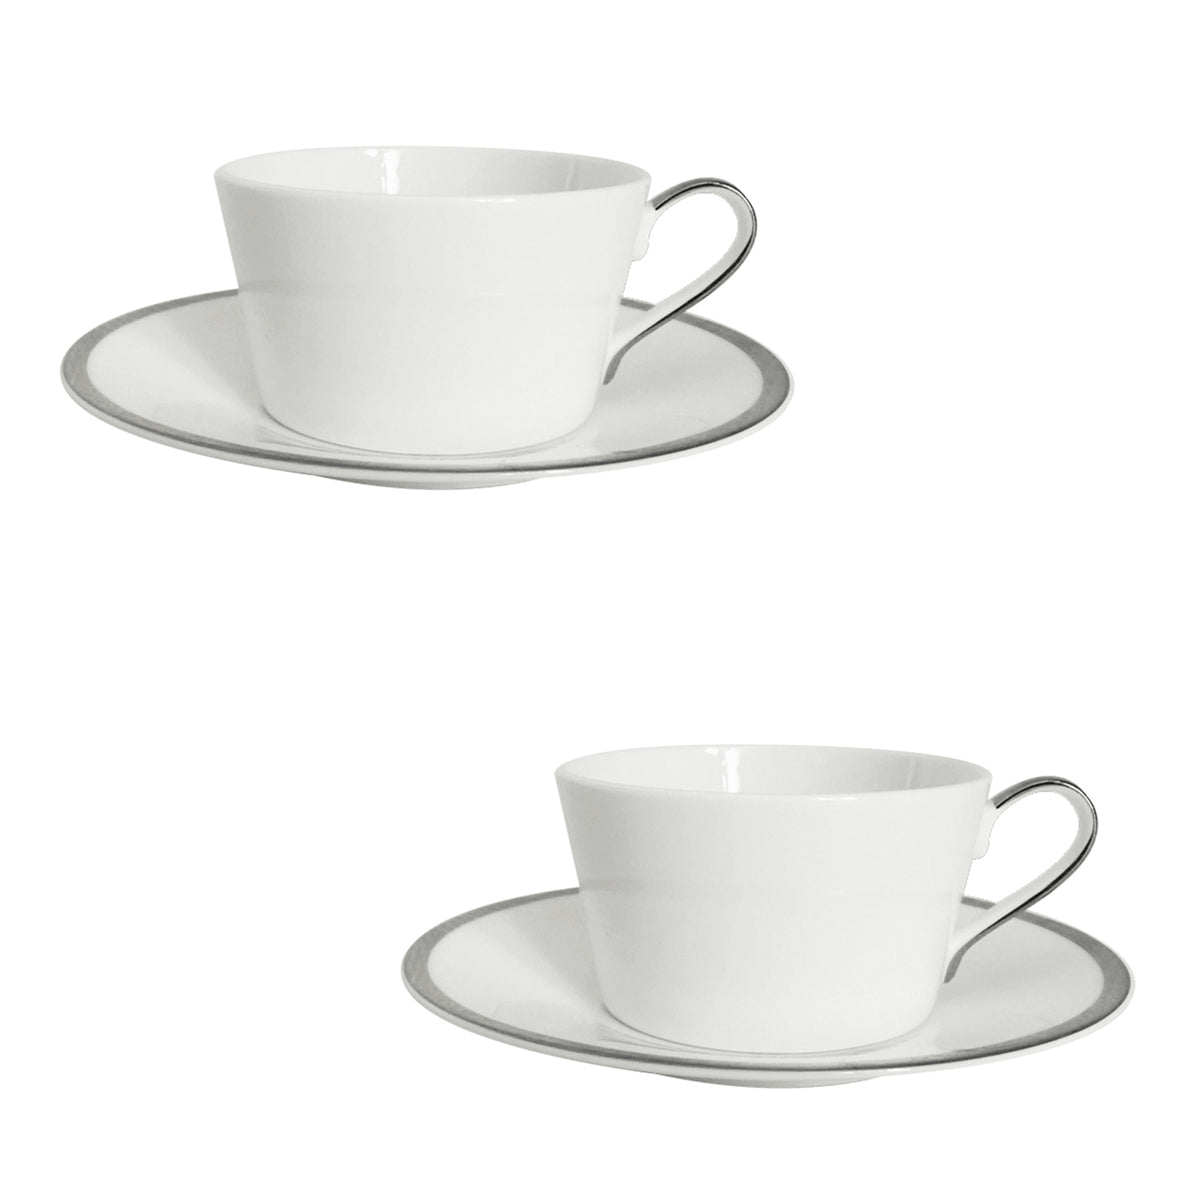 Platinum Edge Set of 2 Cup and Saucer